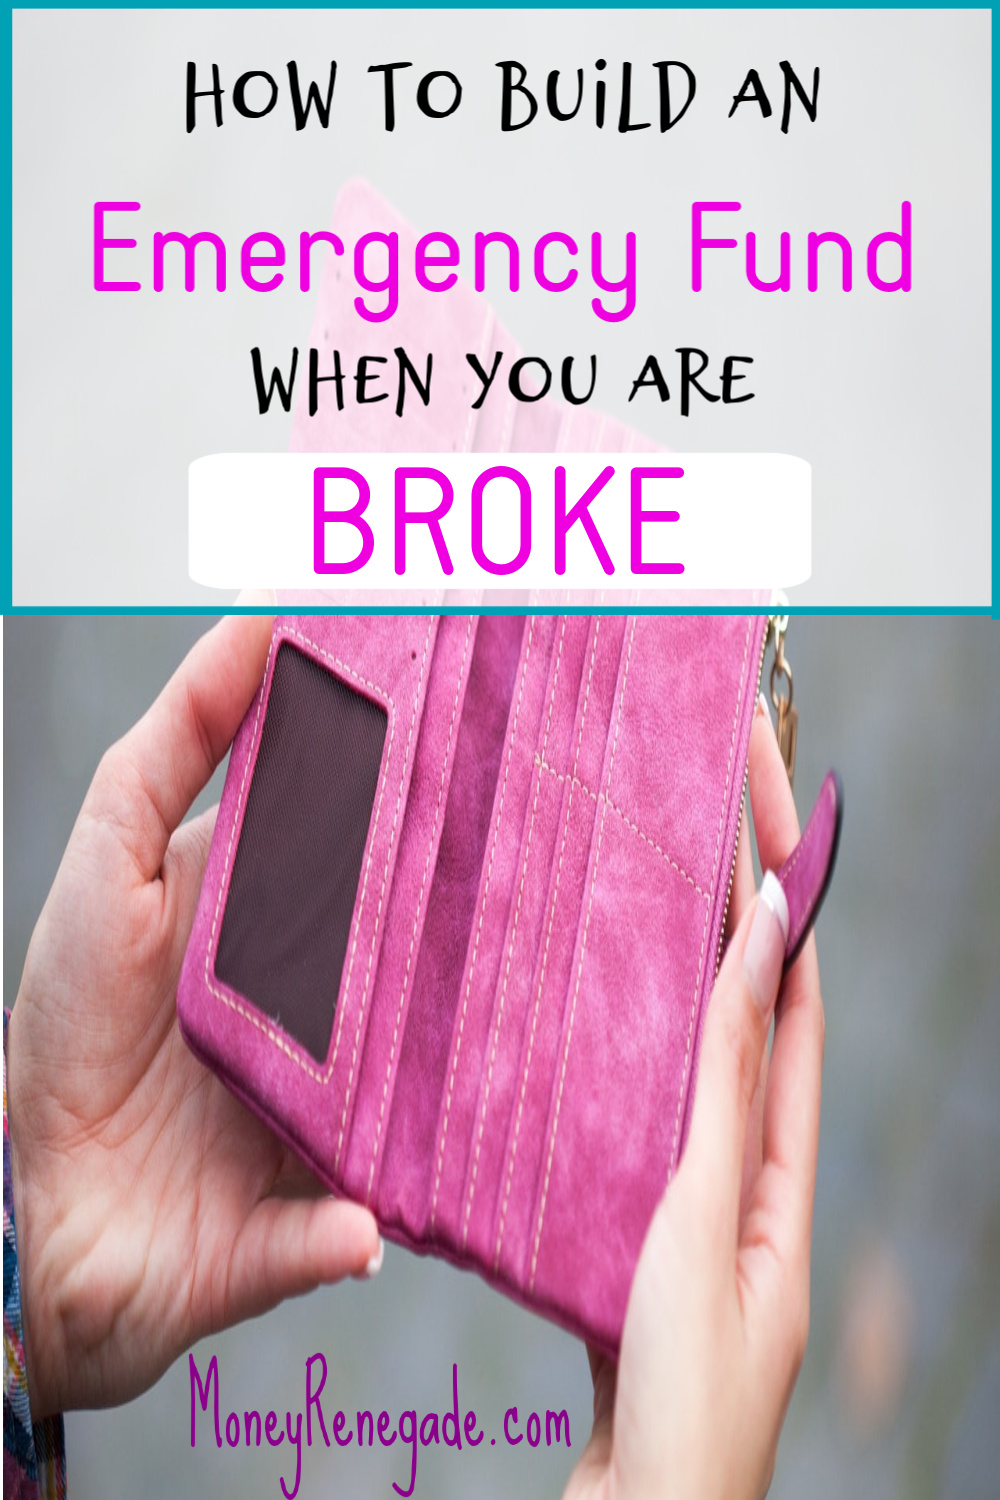 How to build an emergency fund when you are broke